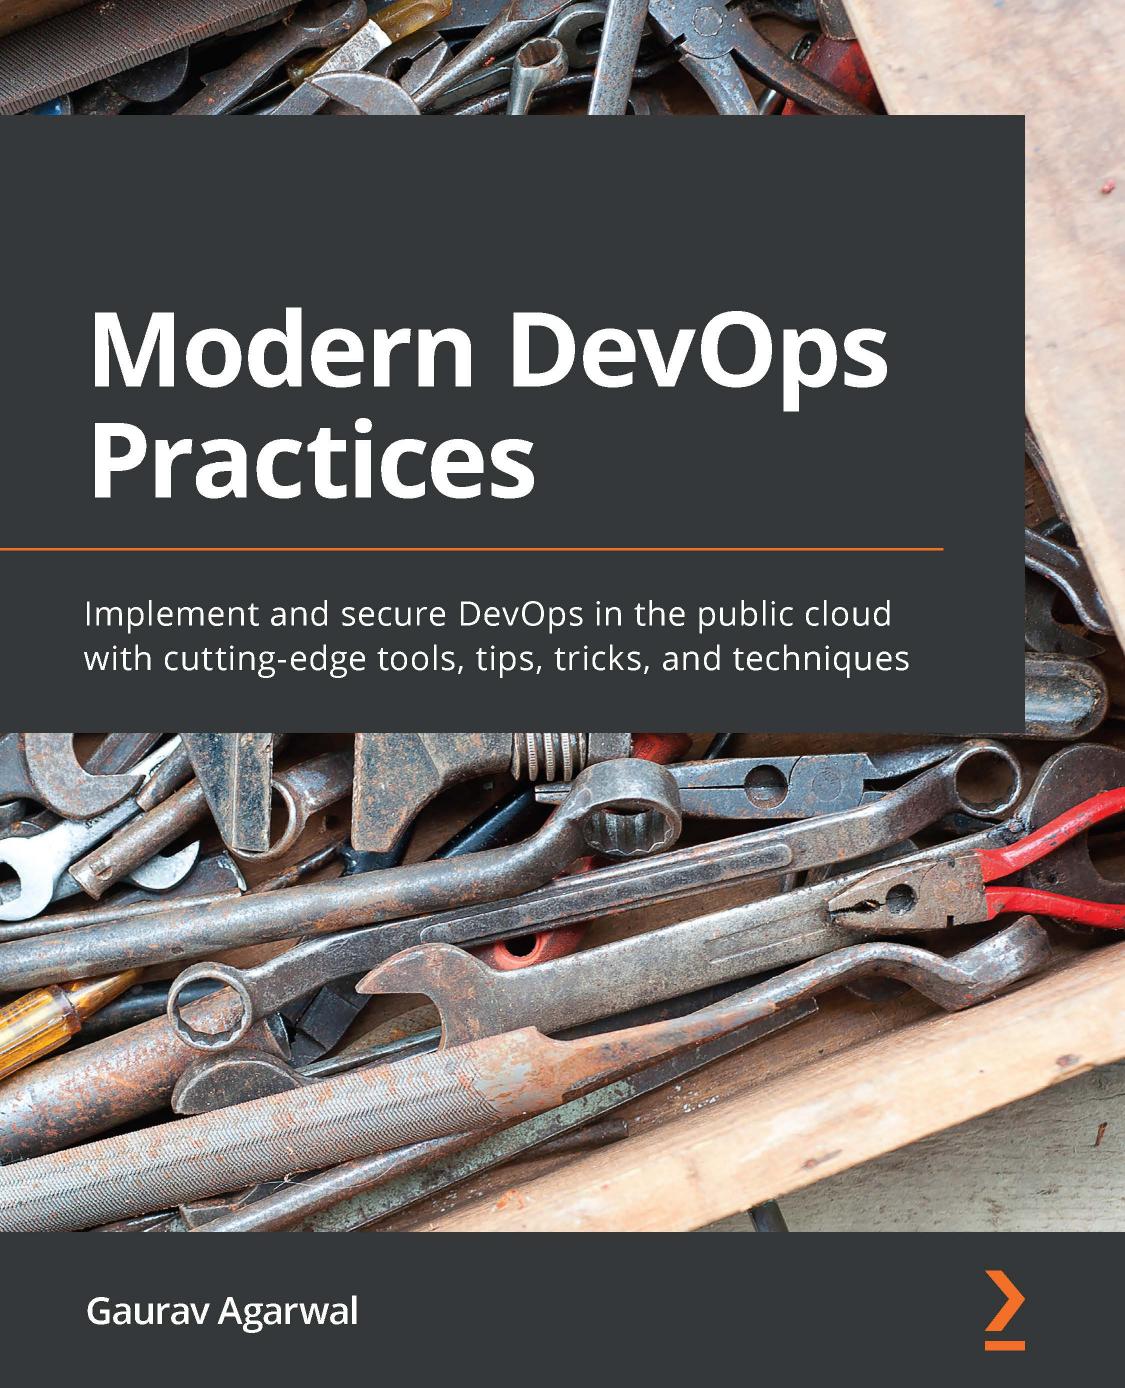 Modern DevOps Practices: Implement and Secure DevOps in the Public Cloud with Cutting-Edge Tools, Tips, Tricks, and Techniques